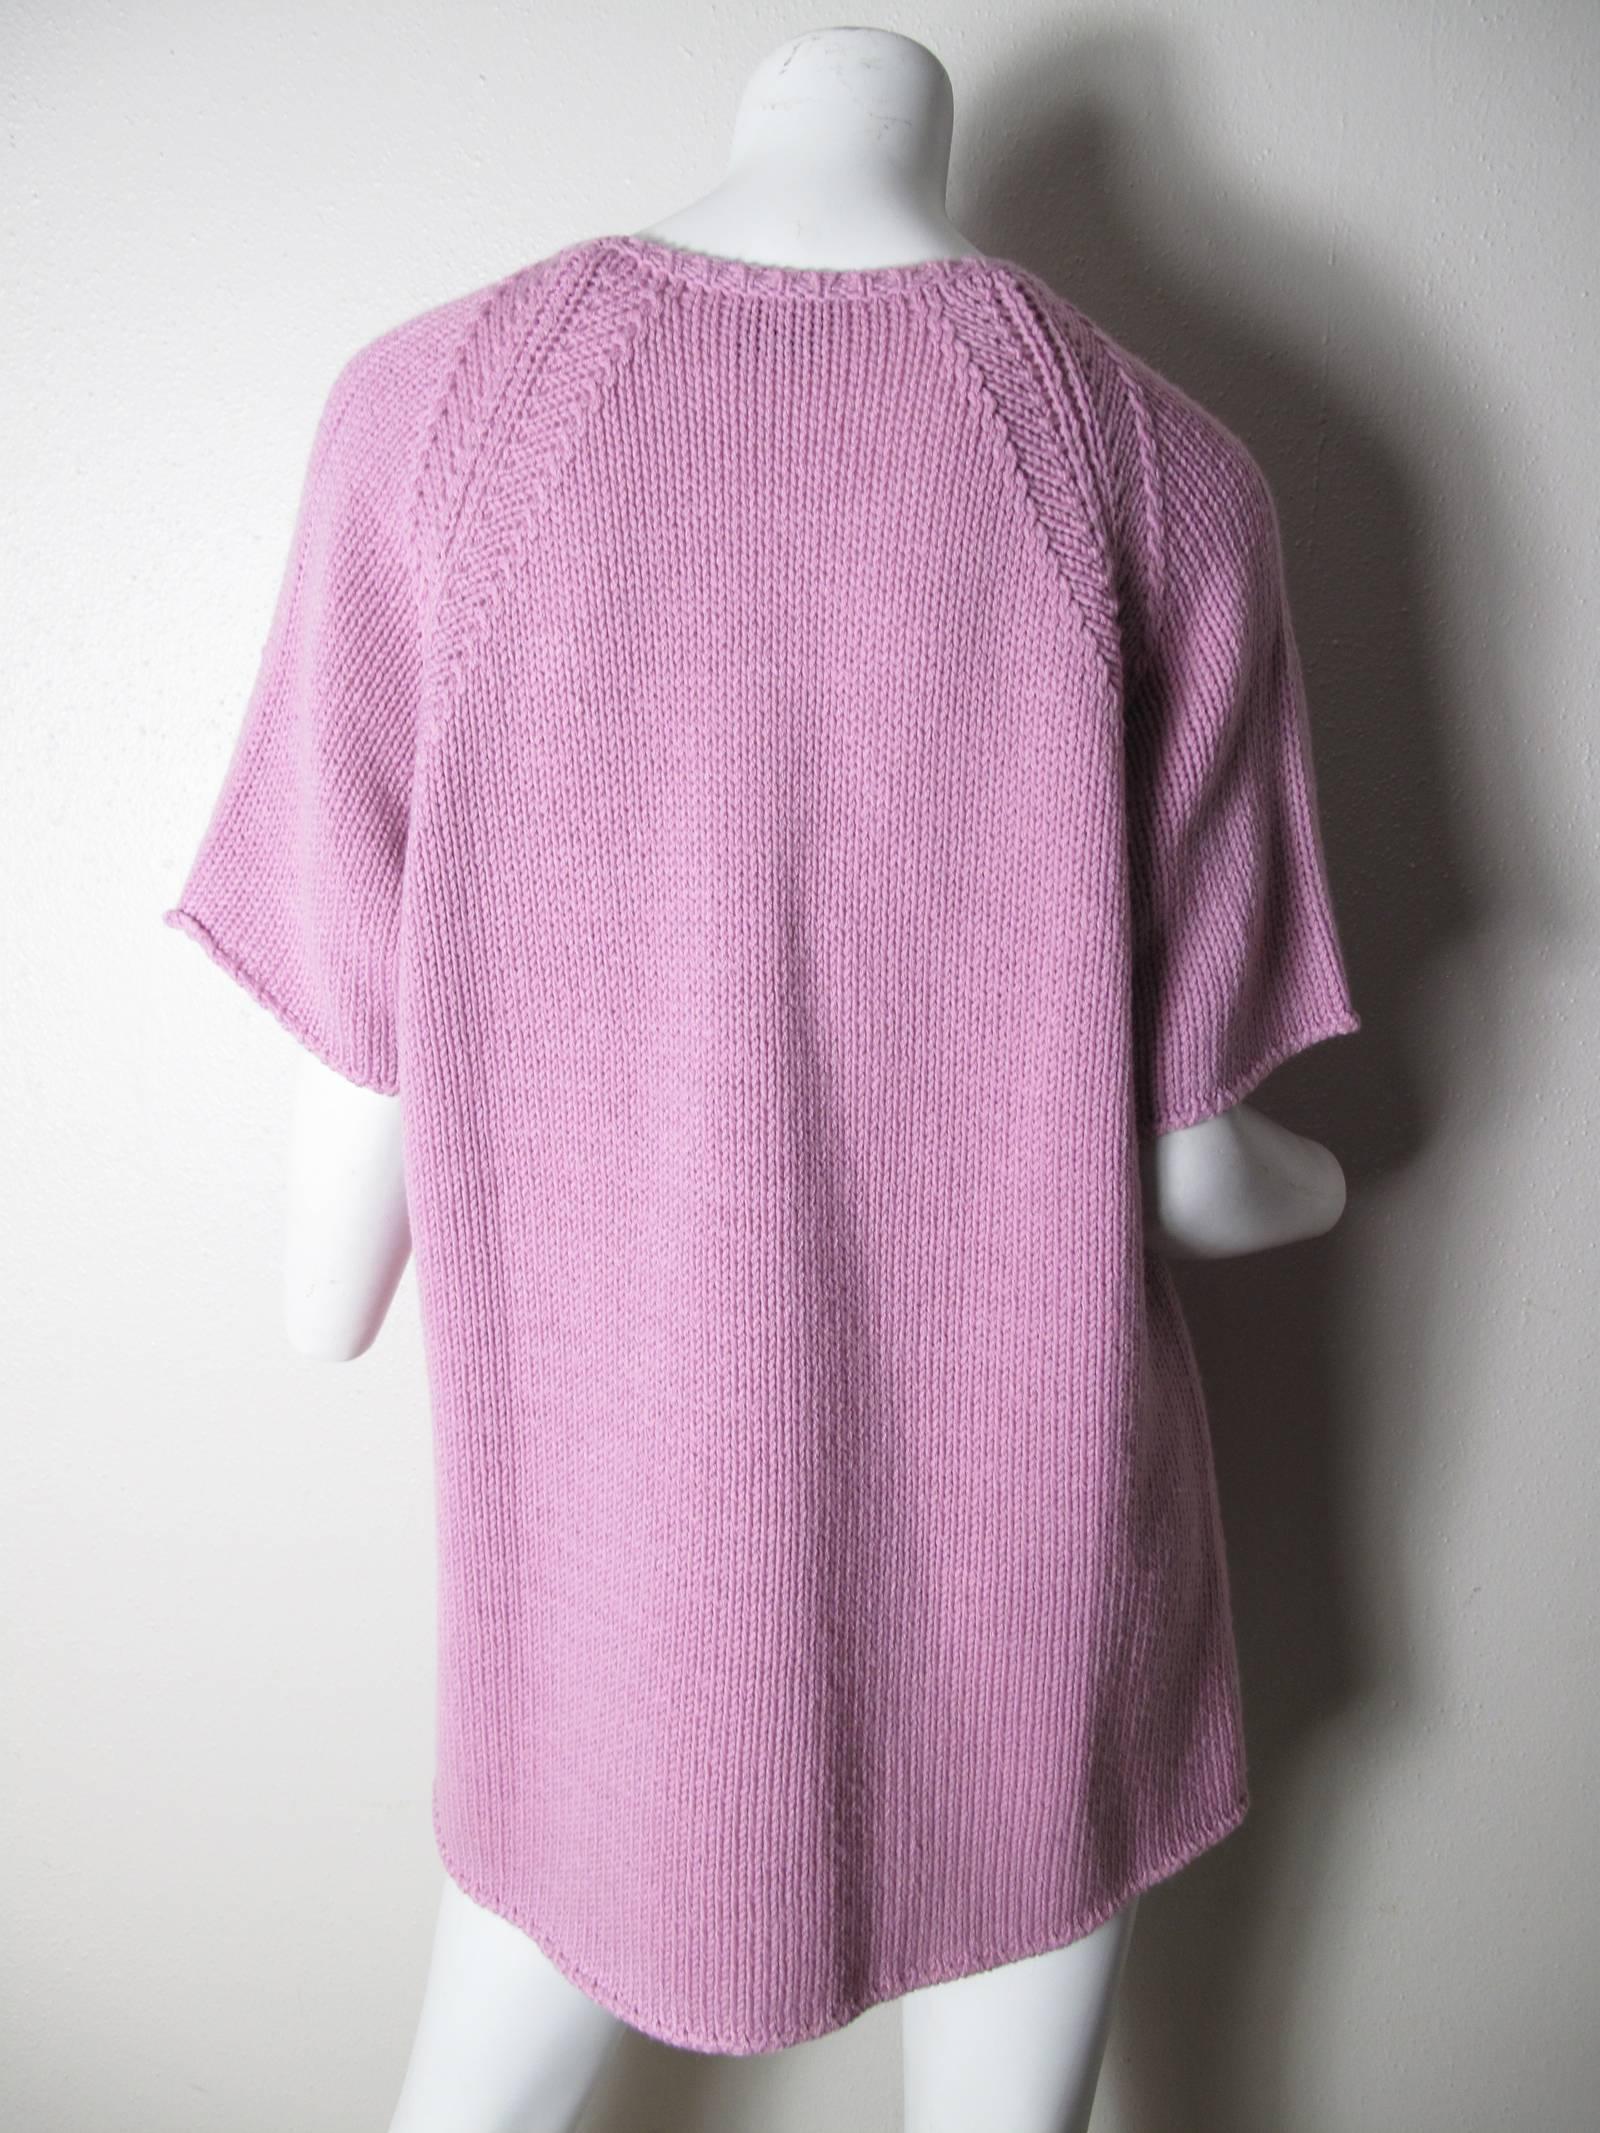 Gianfranco Ferre purple knit short sleeve sweater.  Wool & Acrylic blend. Condition: Excellent.  Size Large
We accept returns for refund, please see our terms. We offer free ground shipping within the US. Please let us know if you have any